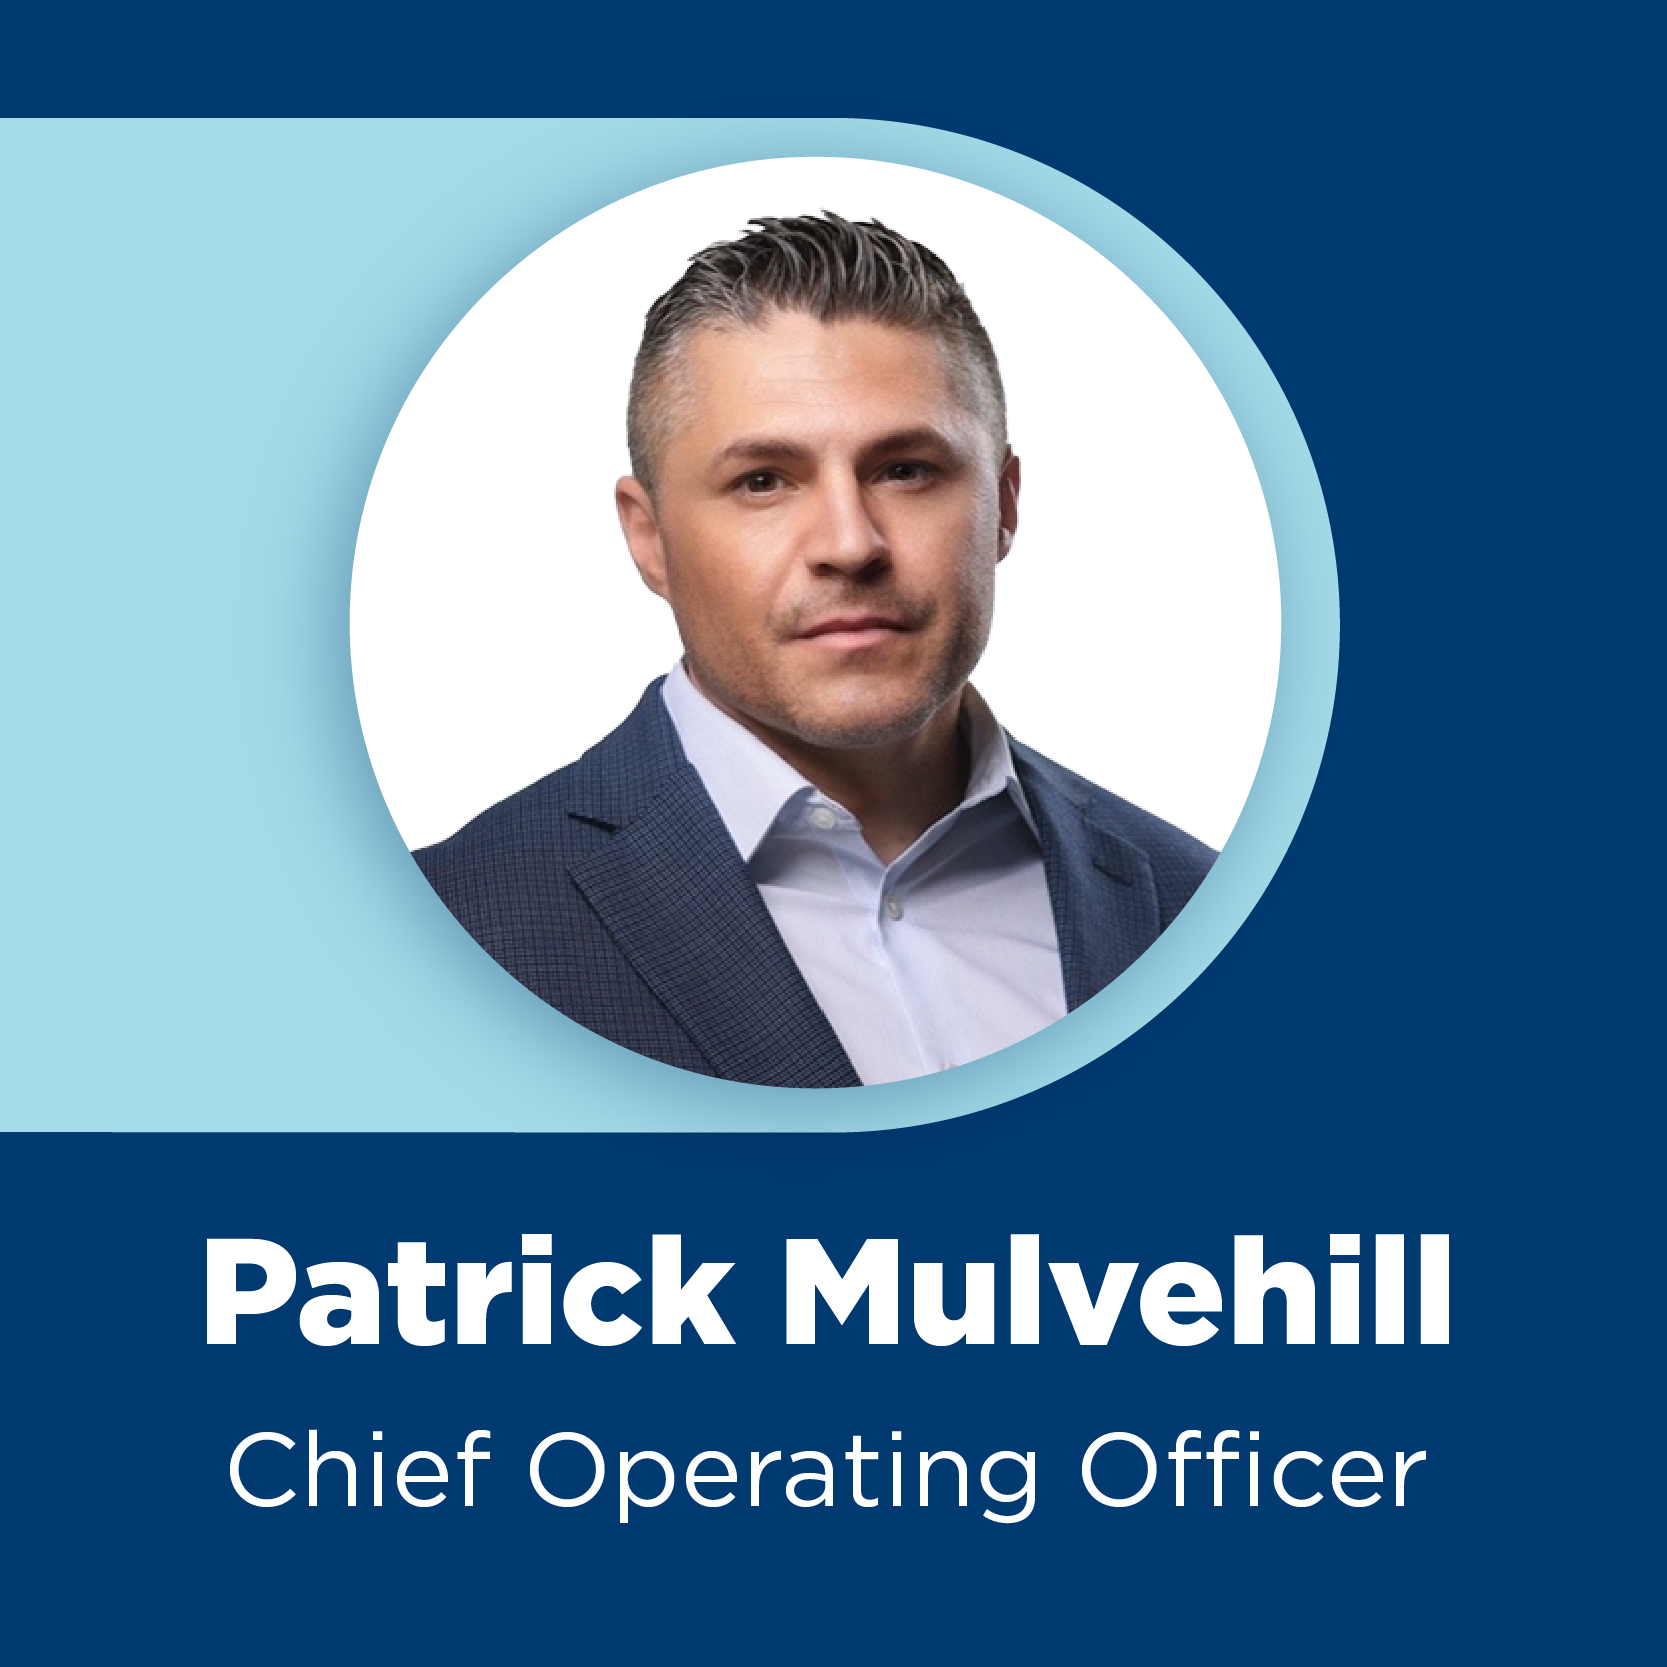 Patrick Mulvehill Promoted to Chief Operating Officer